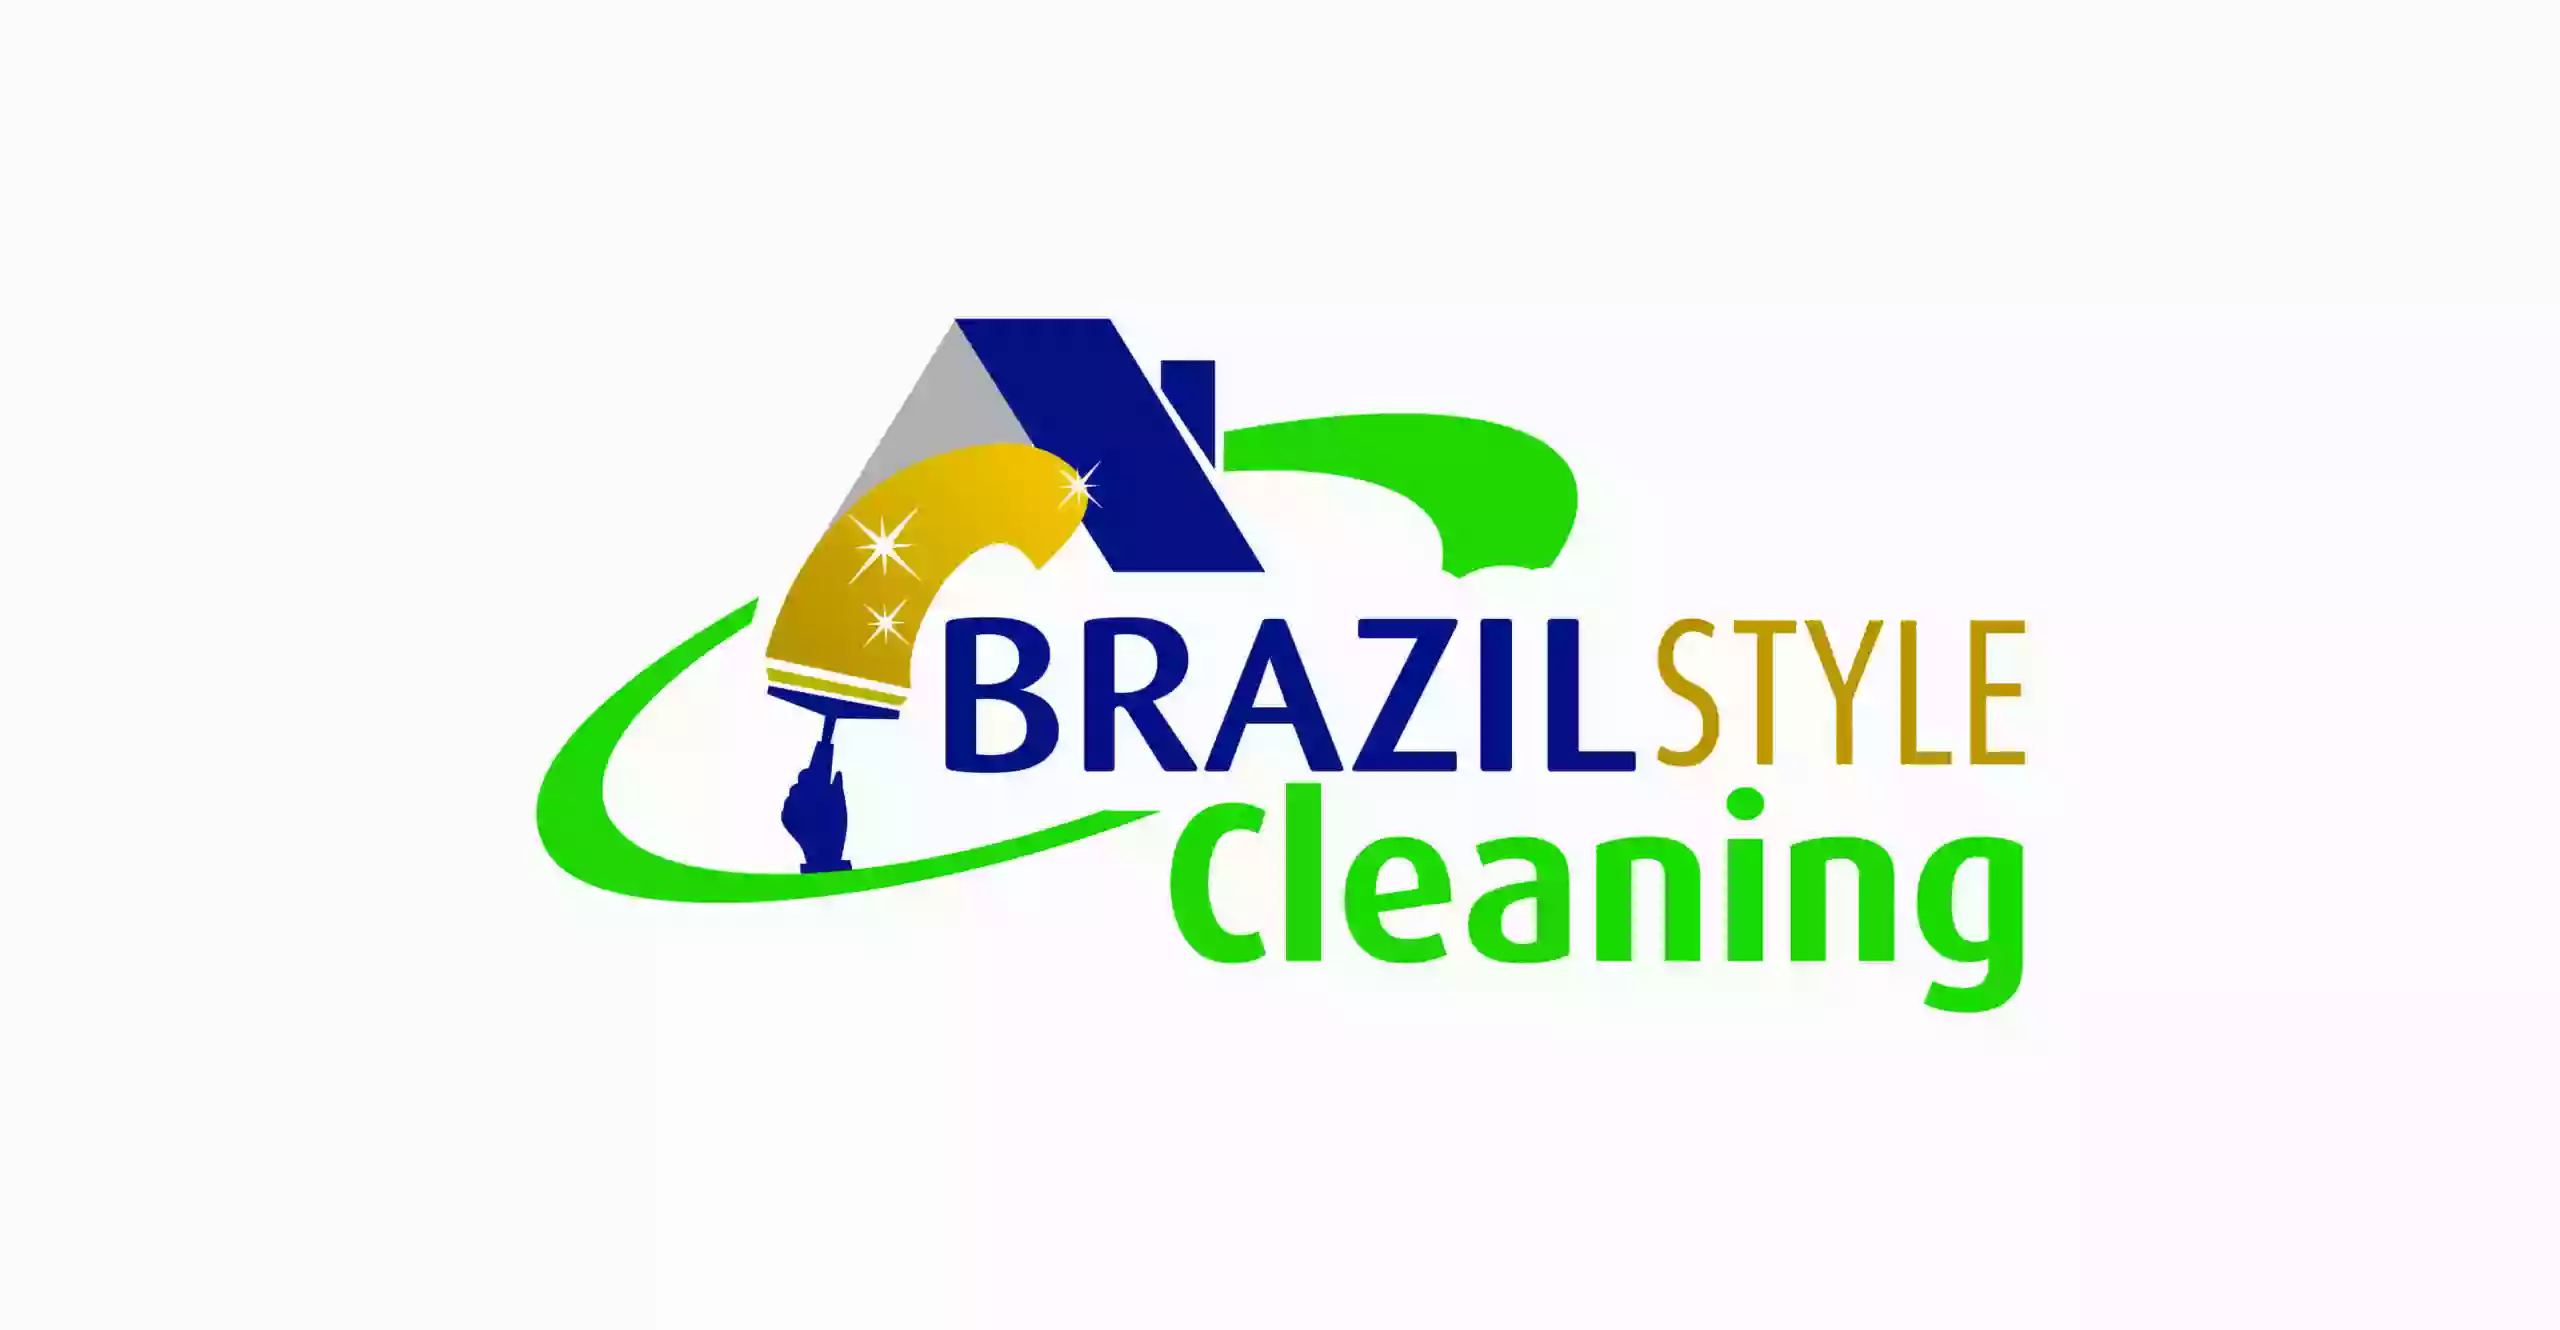 Brazil Style Cleaning services inc